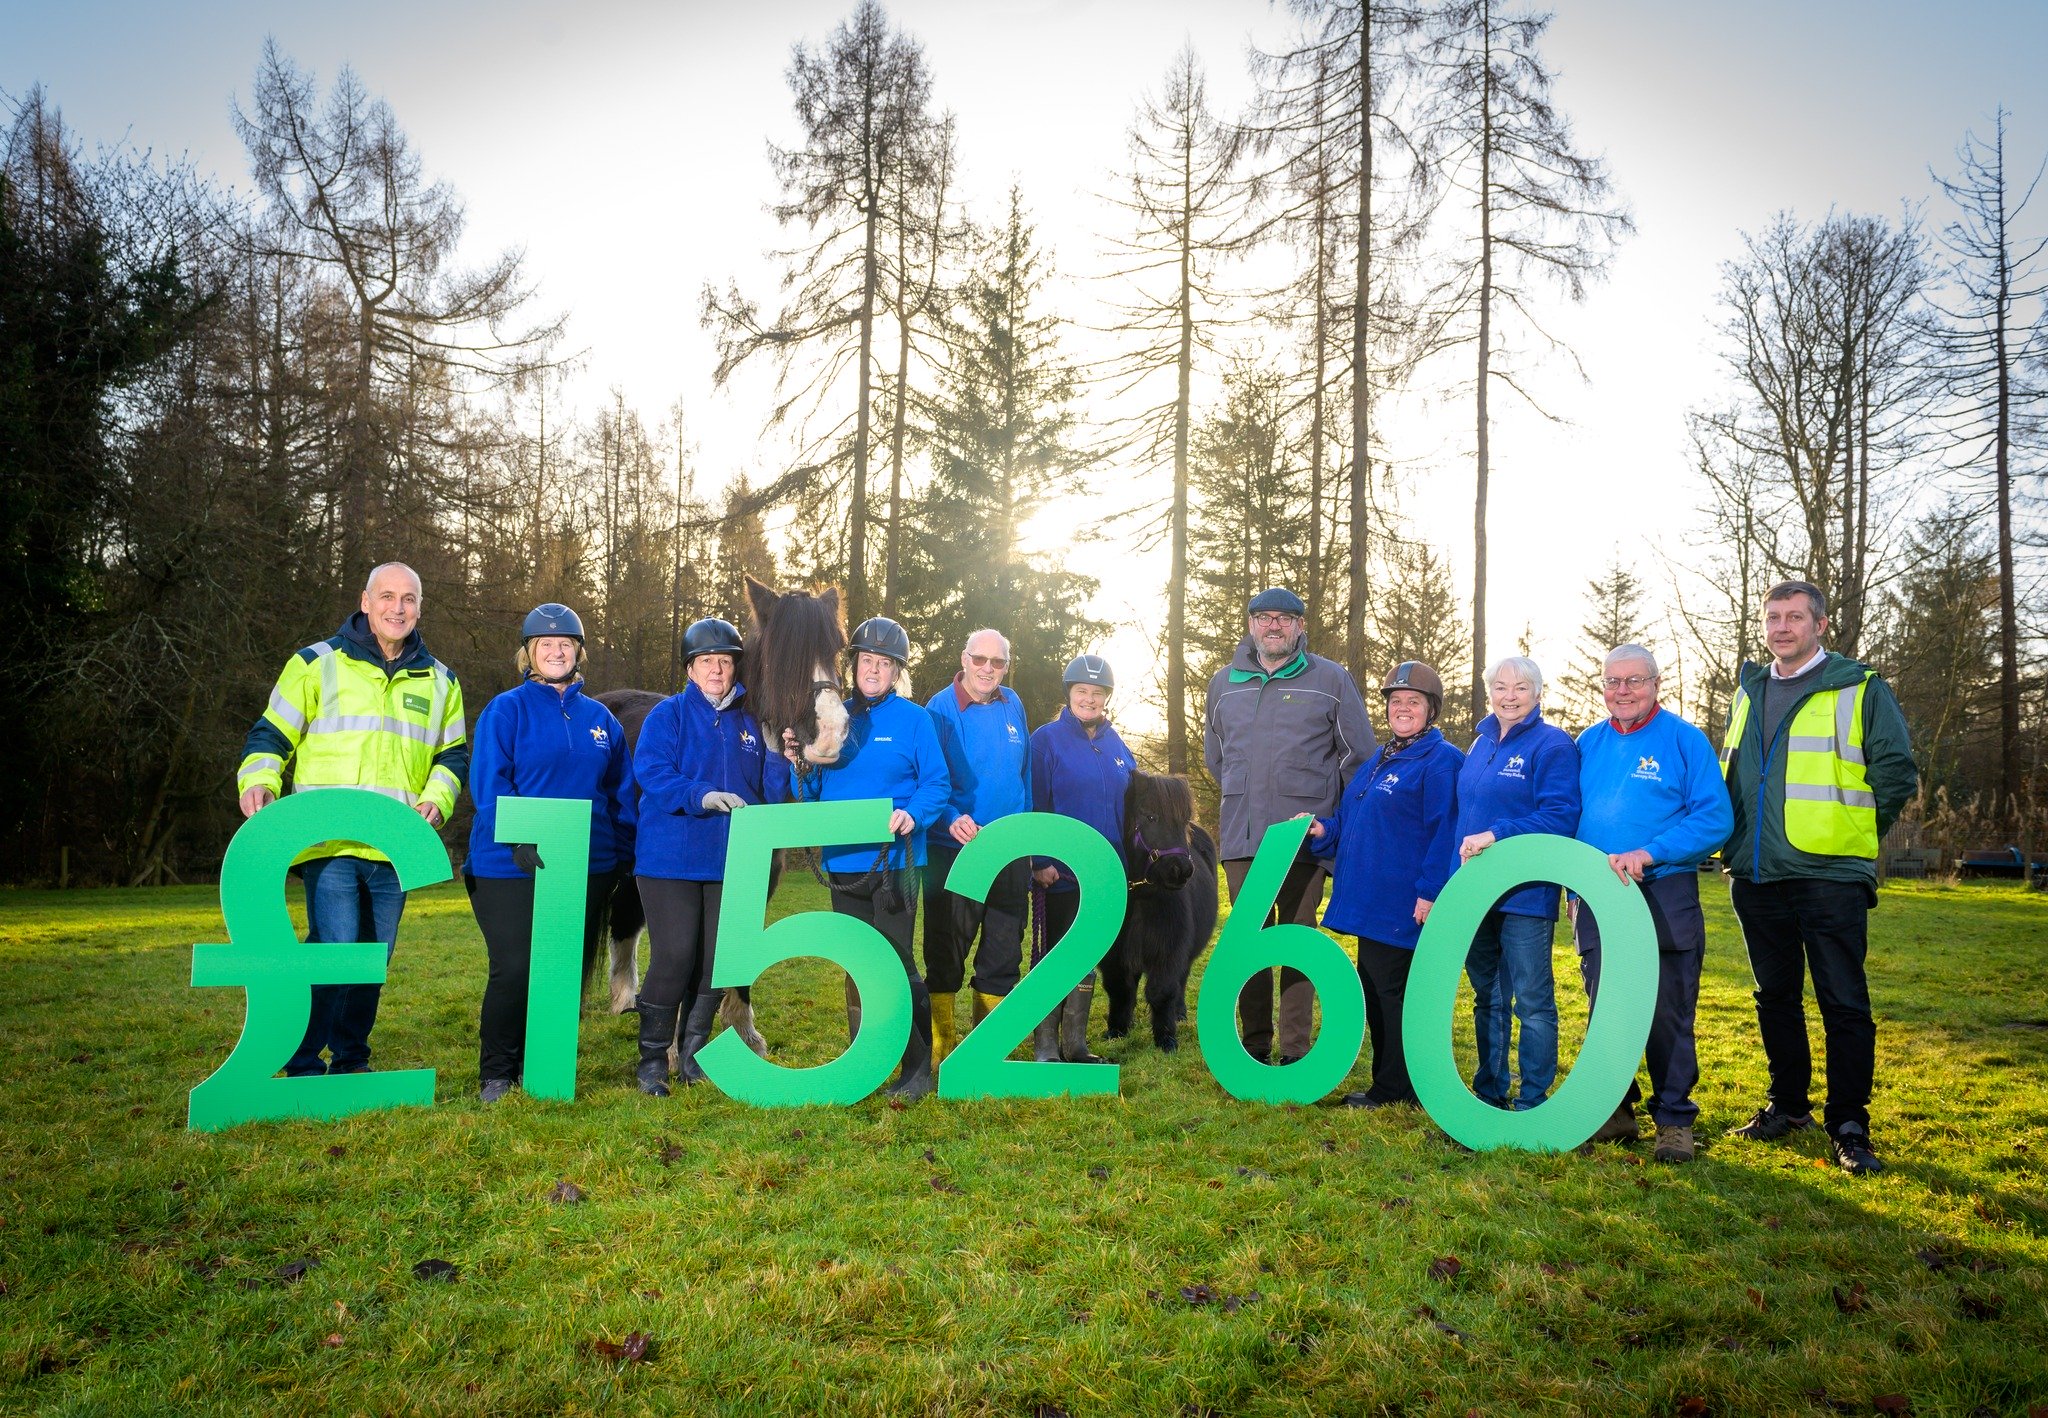 A huge thank you Scottish Power